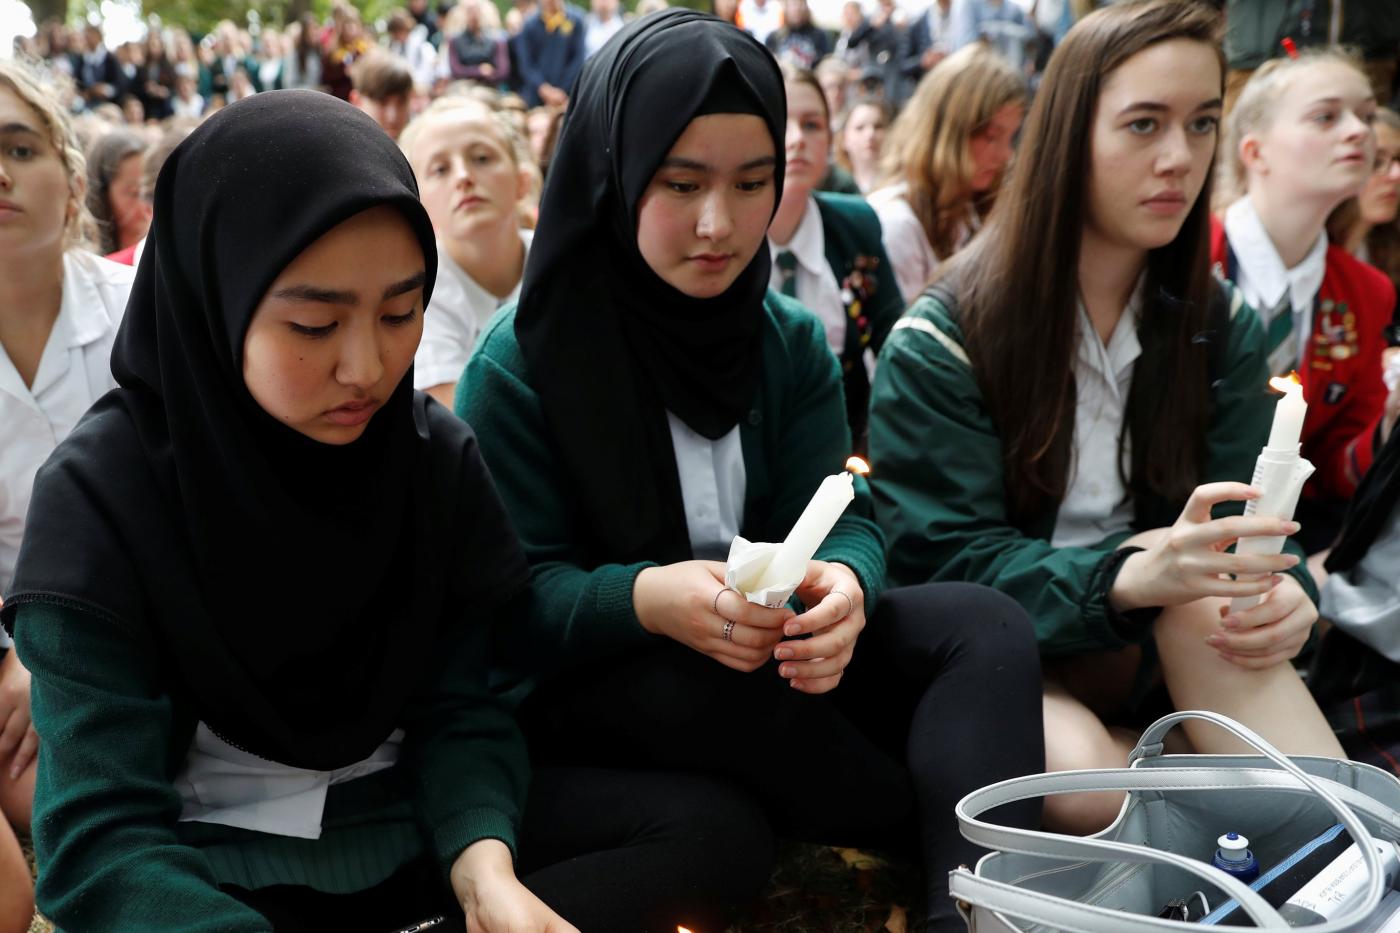 New Zealand has been a home to Muslims for centuries, and will remain so